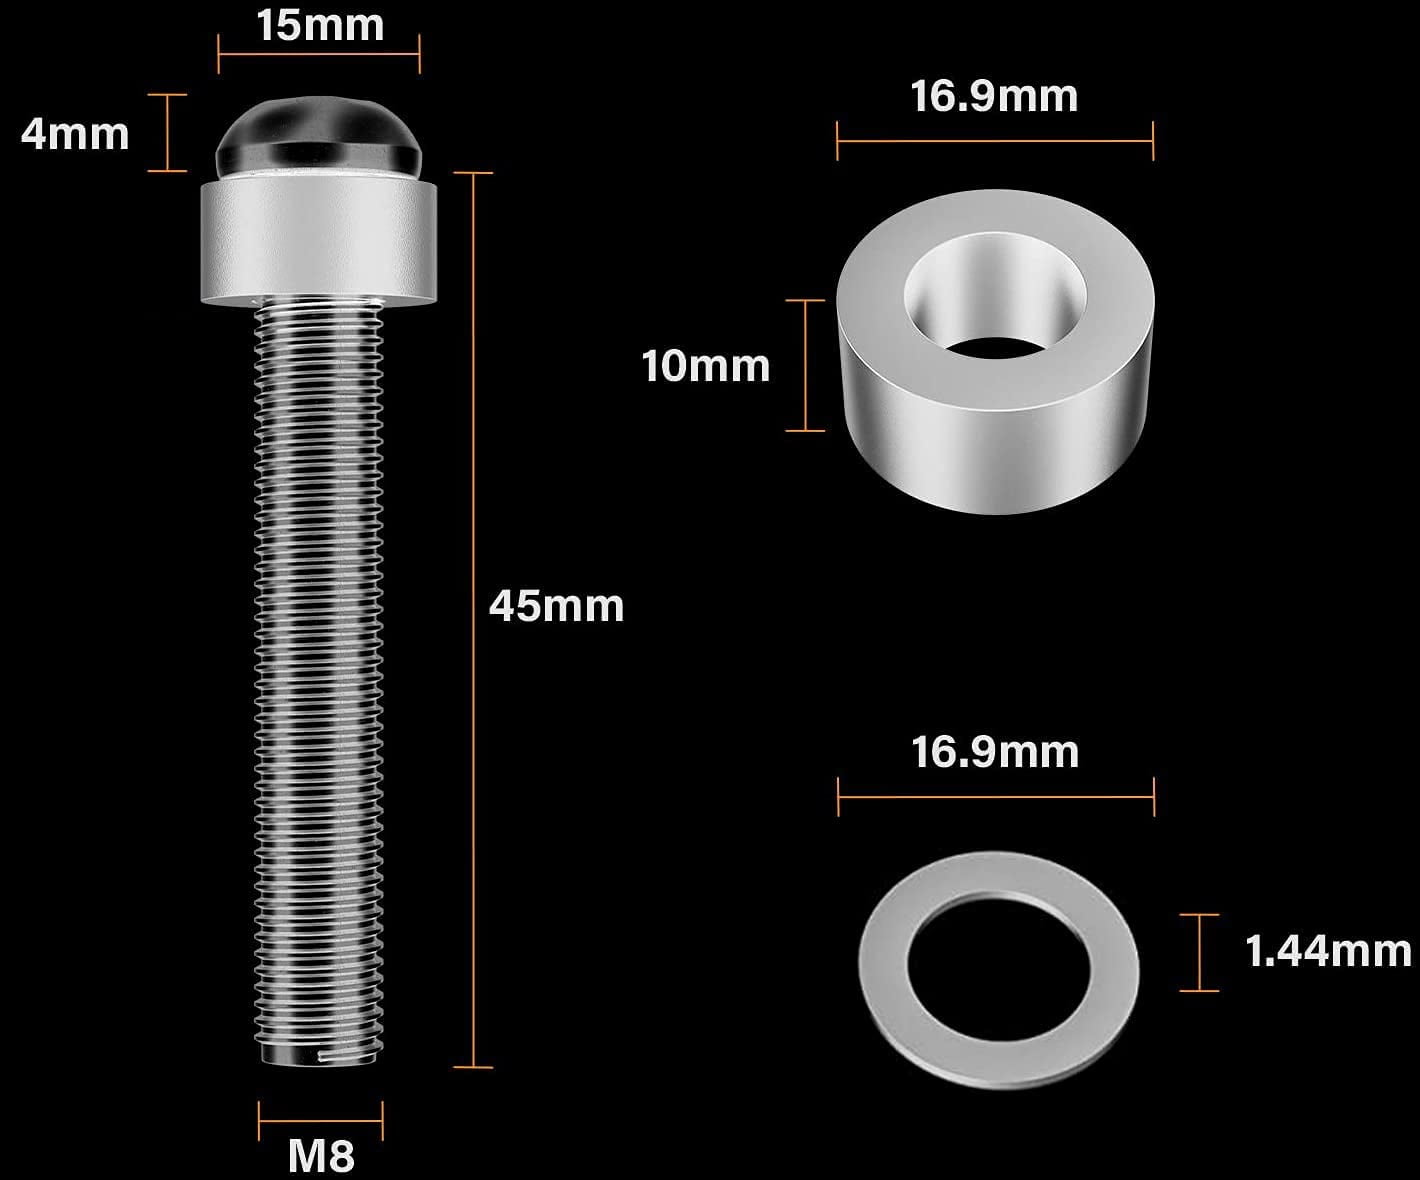 M8 x 45mm VESA Mount Screws Bolts and Washers for Samsung Curved LCD TV  Screws, for LG/Vizio/Philips/Sony Bravia